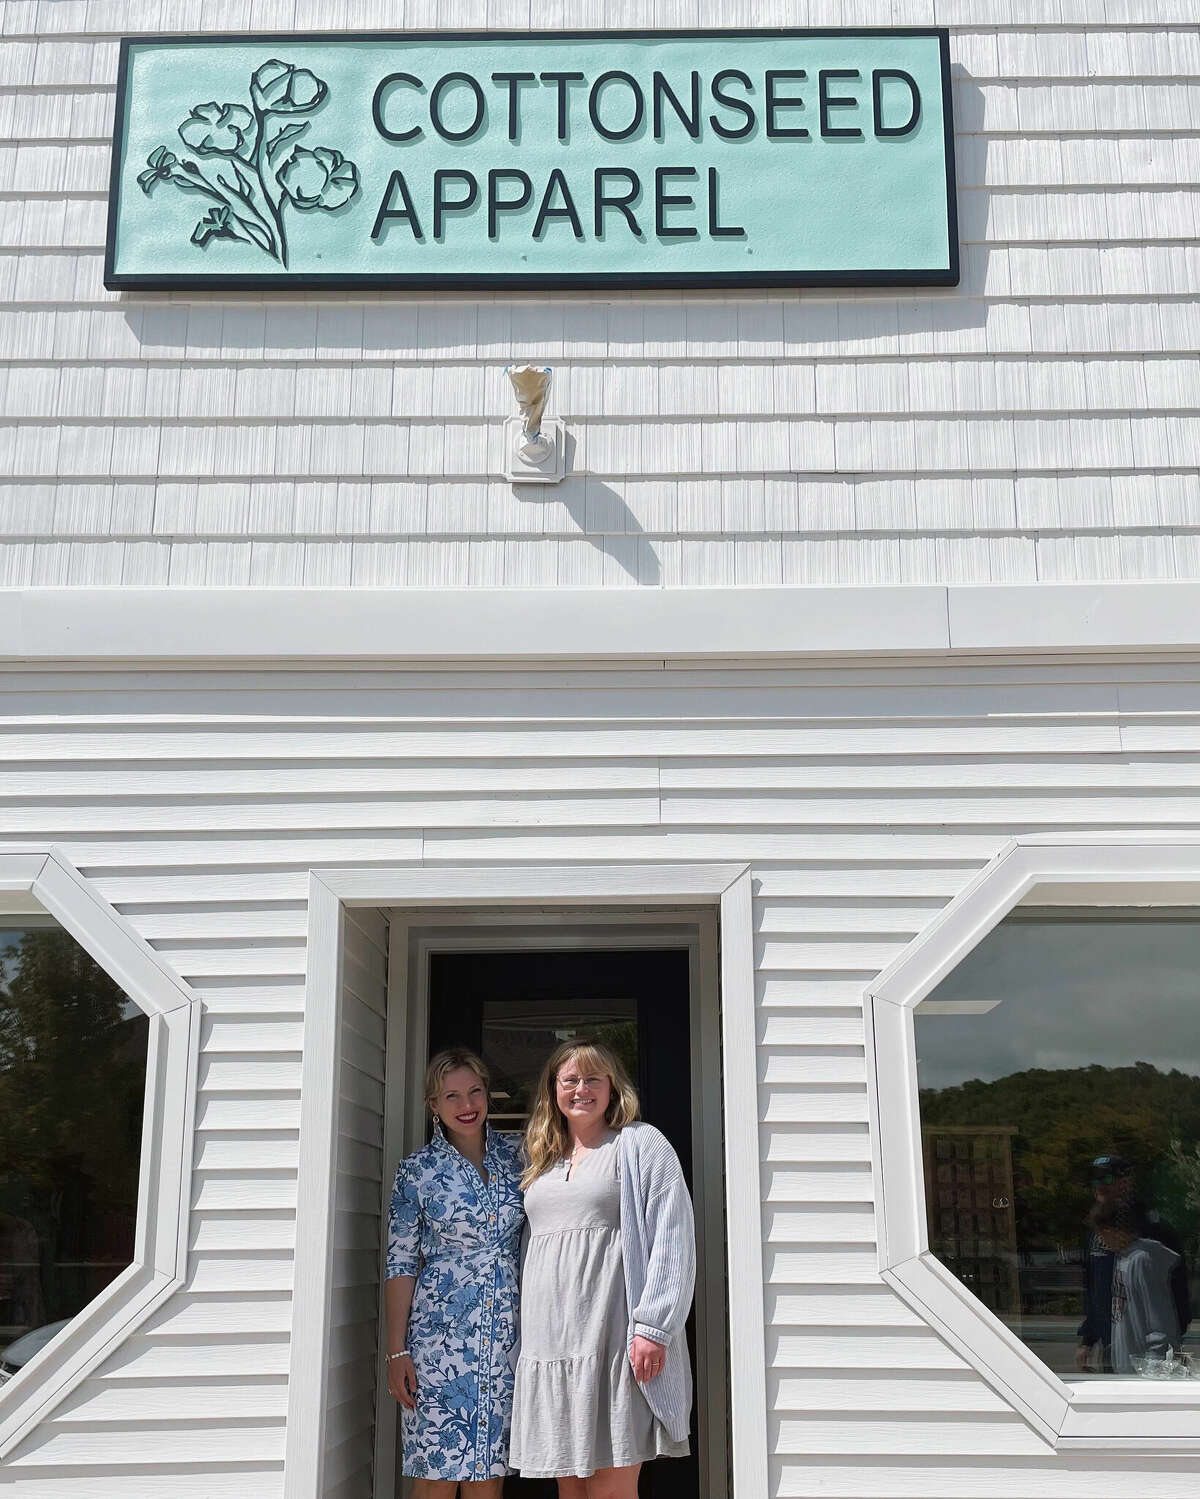 Cottonseed Apparel's second location is at 417 Main St. in Frankfort.